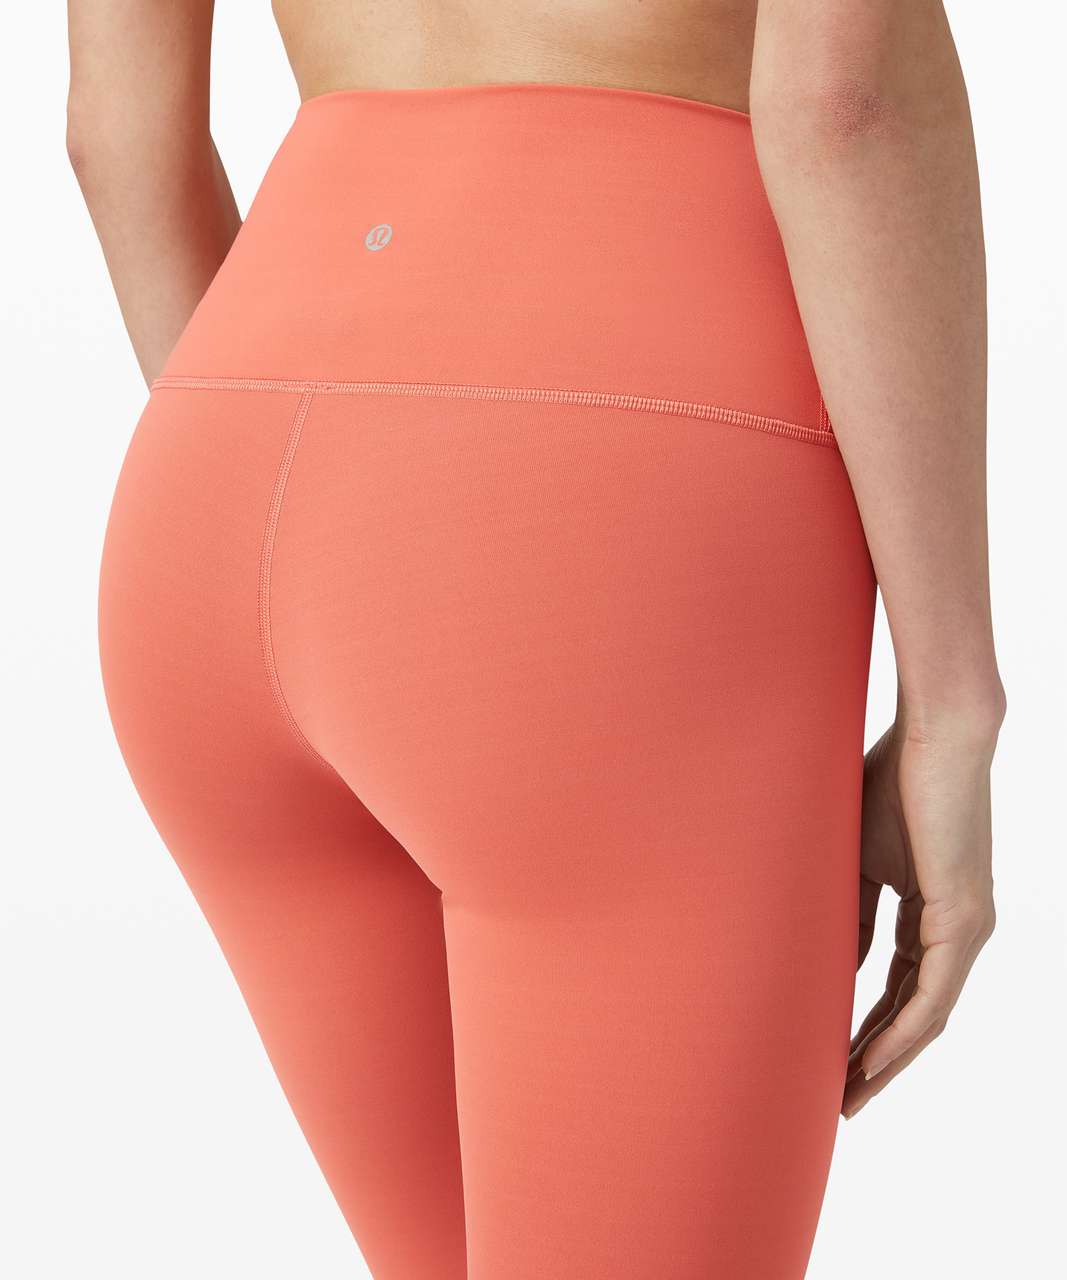 Lululemon Wunder Under Super High-Rise Tight *Full-On Luxtreme 28" - Rustic Coral